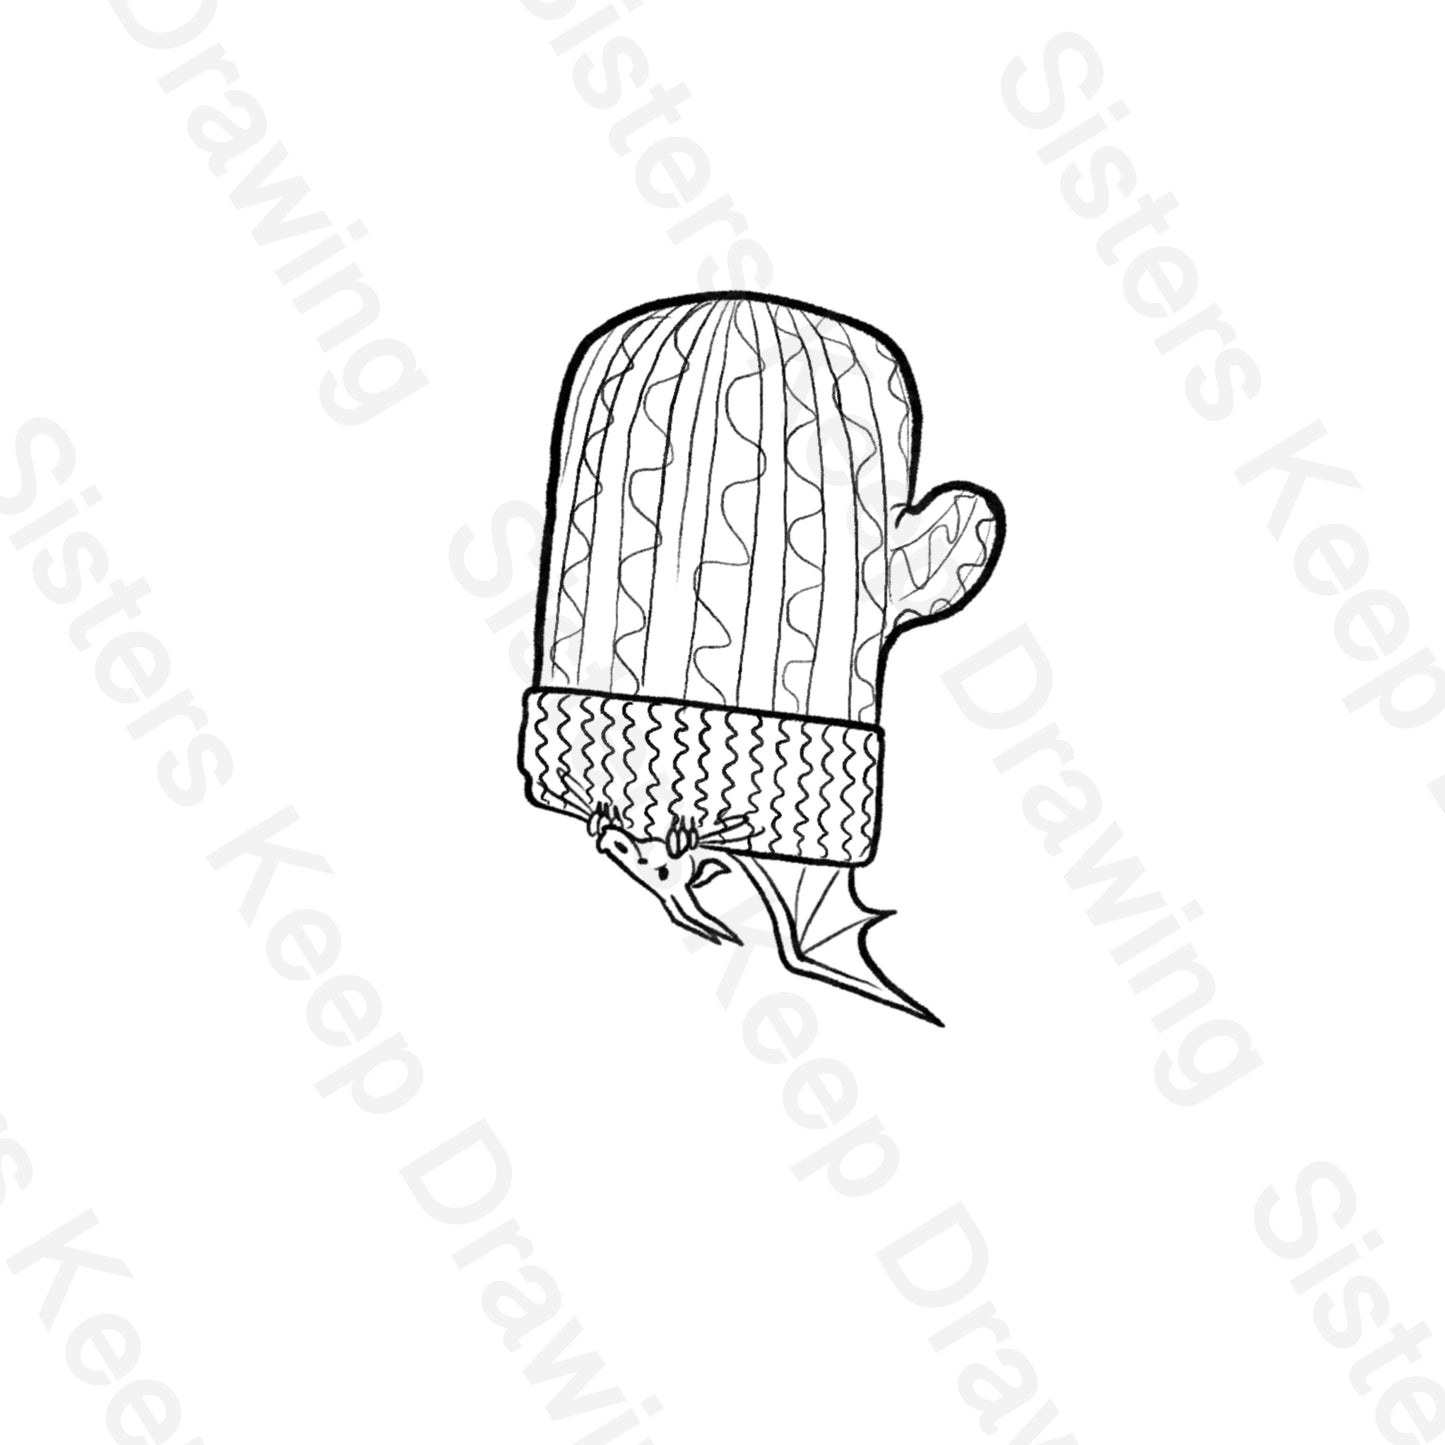 Tiny Dragon in a mitten-Tattoo Transparent Permission PNG- instant download digital printable artw